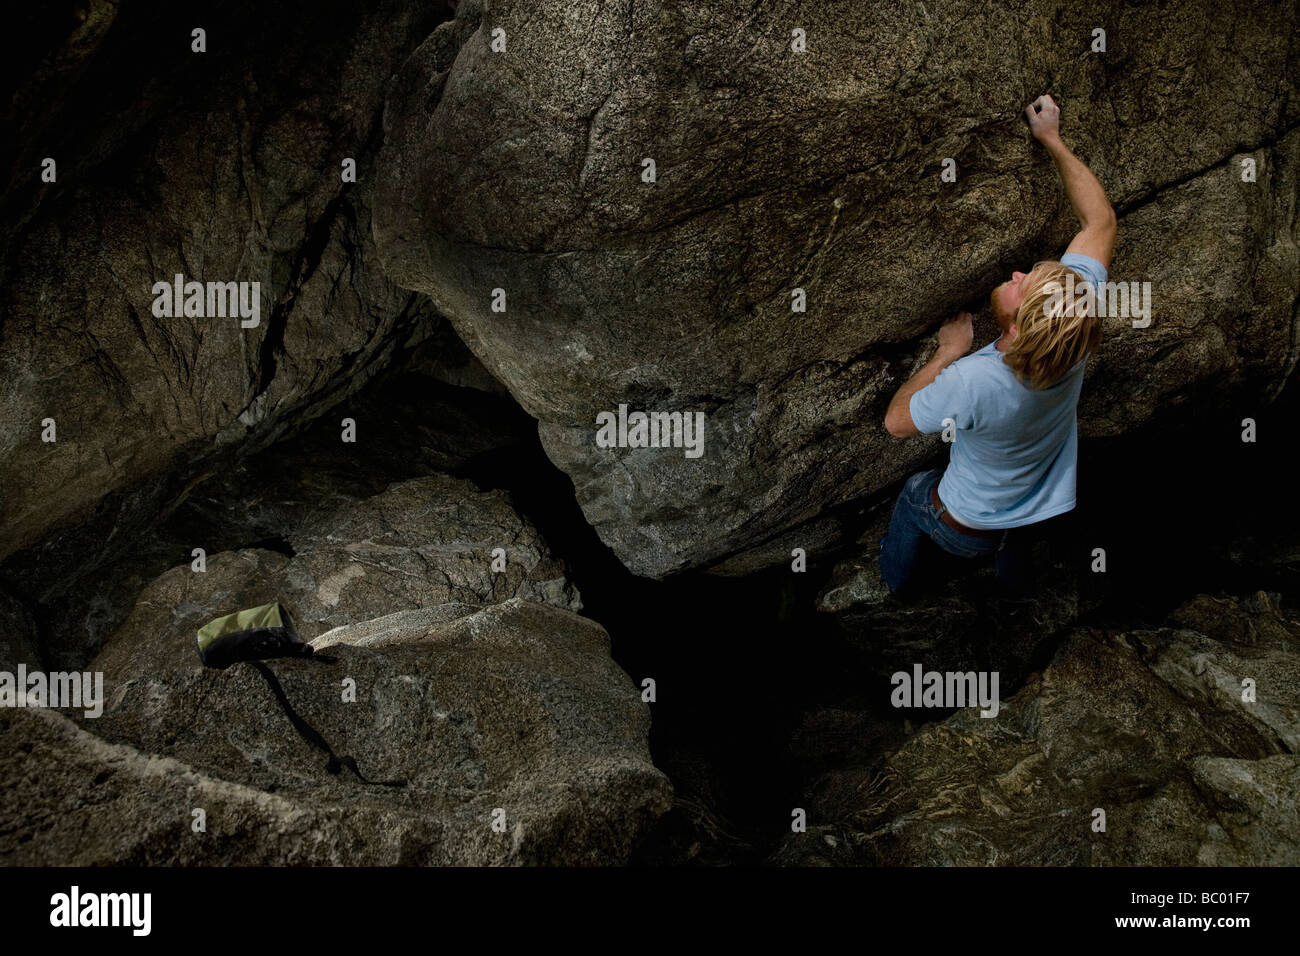 A man bouldering in Big Sur. Stock Photo